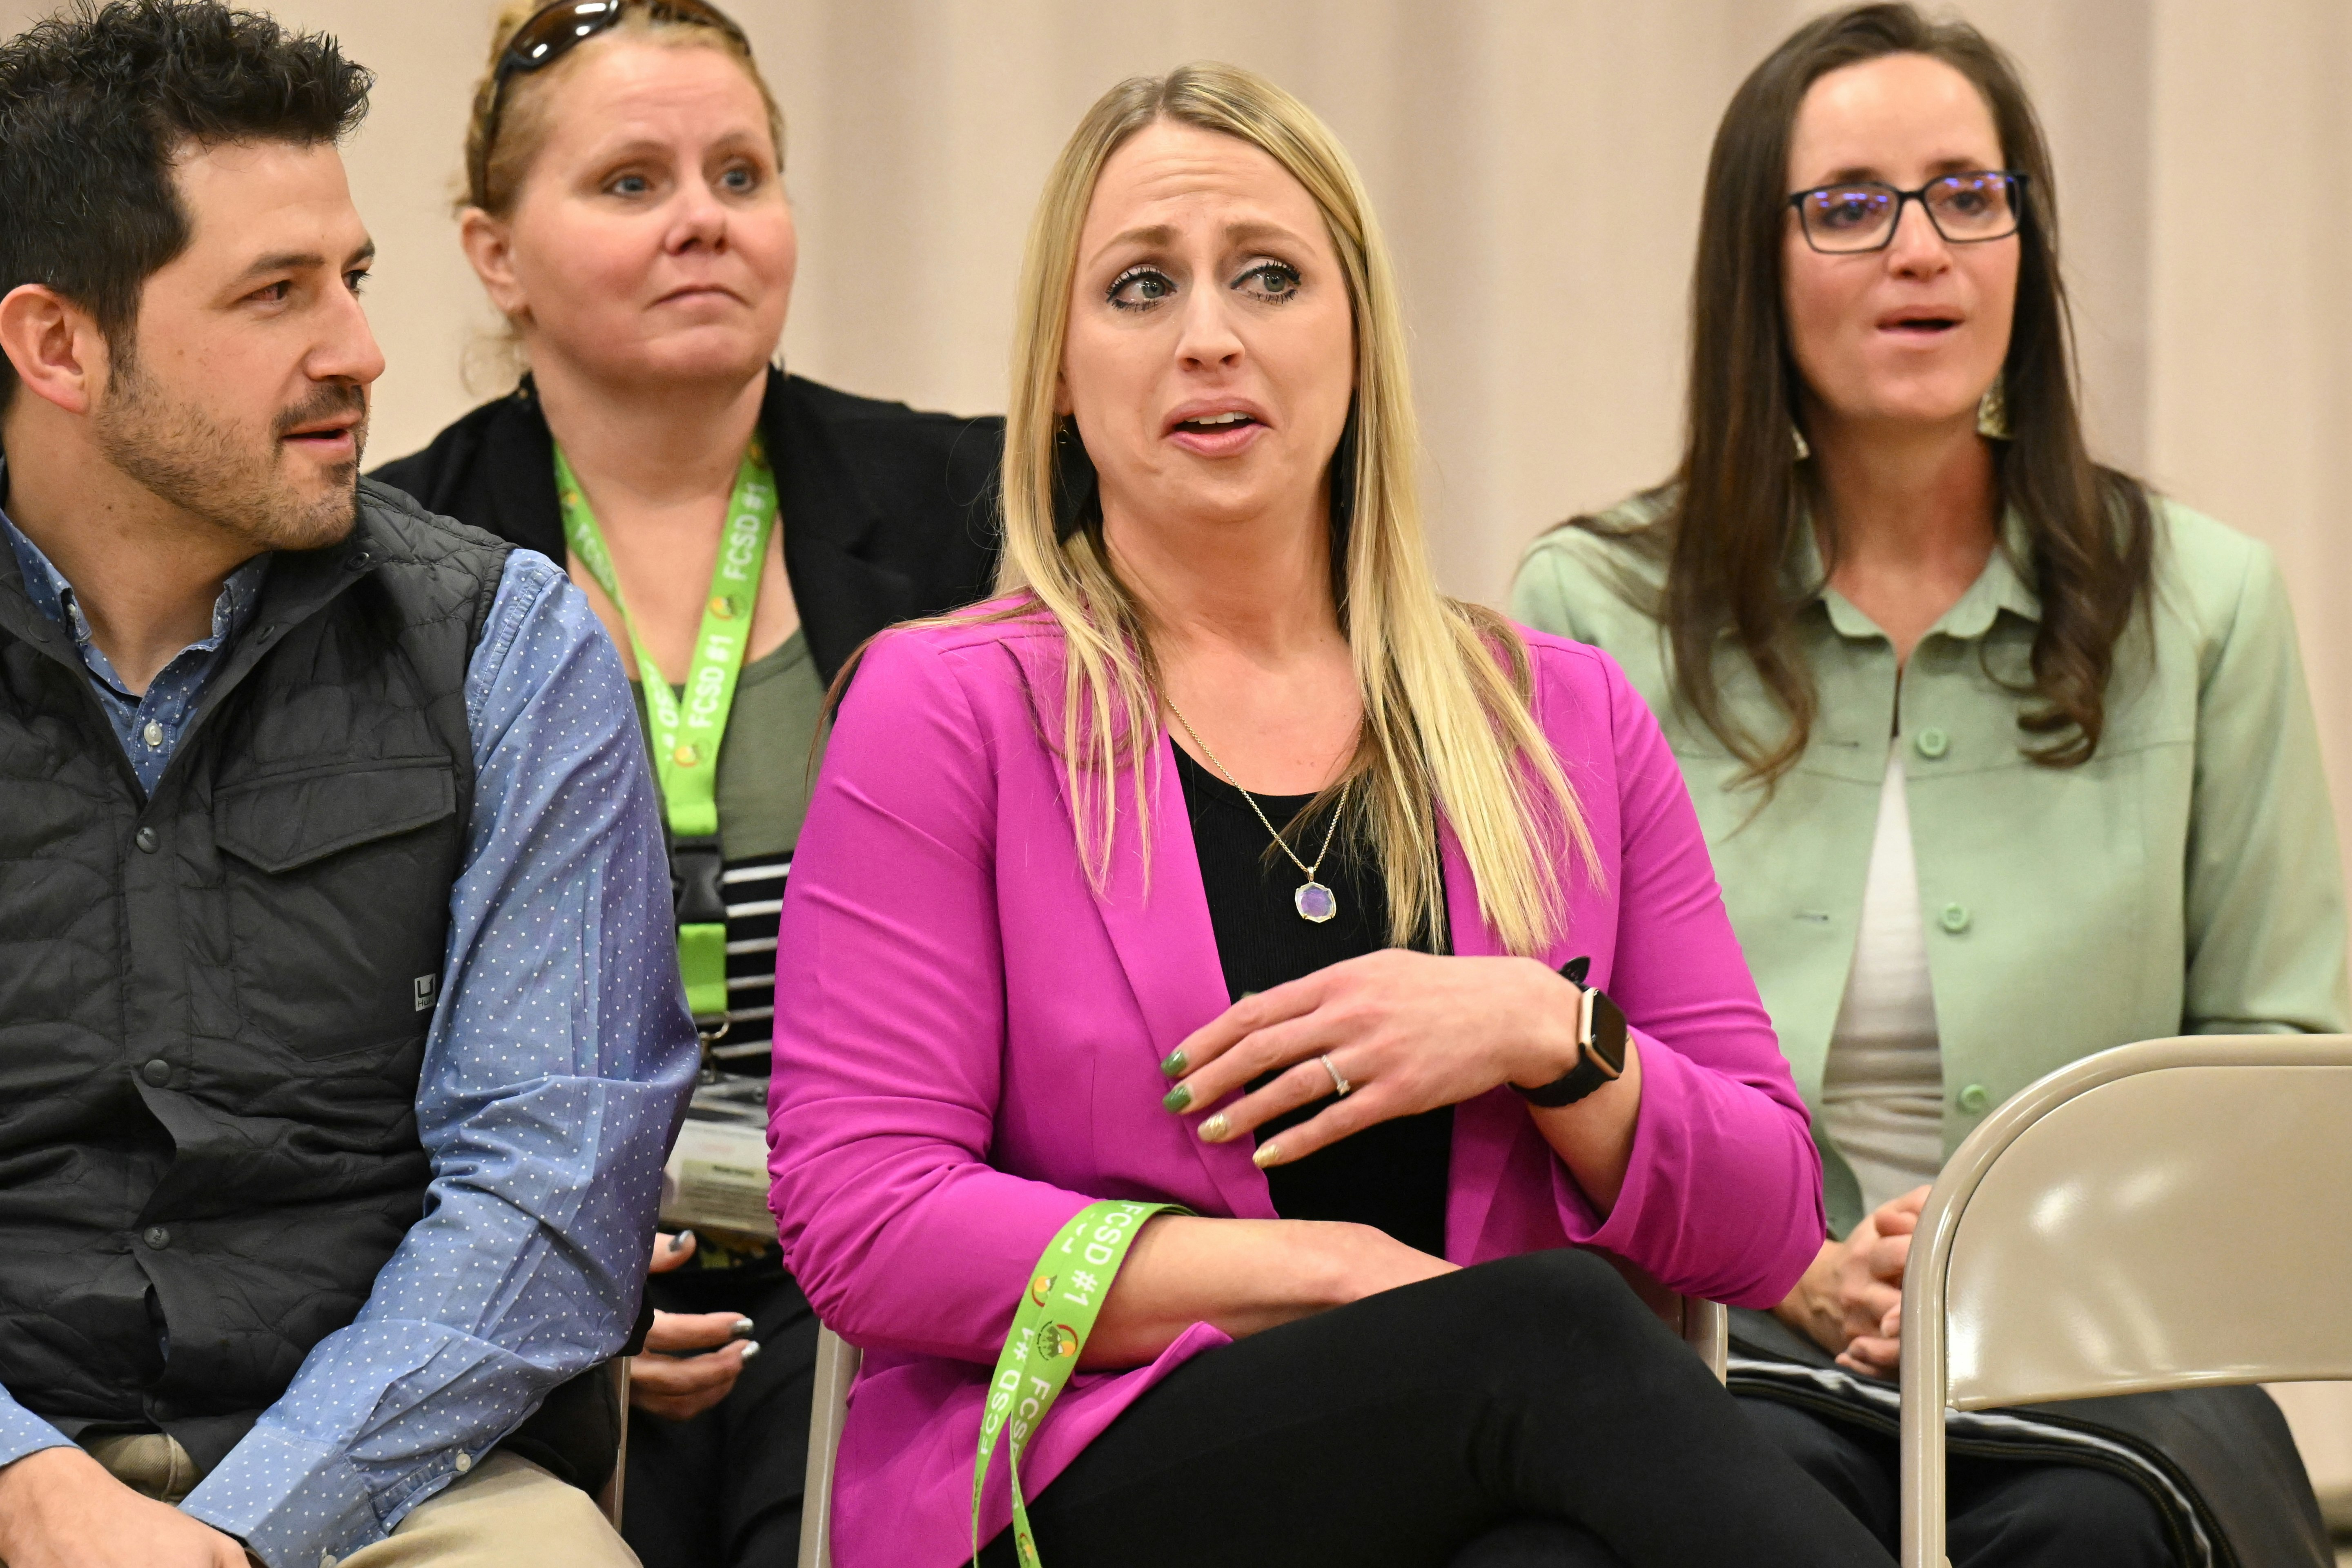 Gannett Peak Elementary Assistant Principal Megan Park learns Tuesday morning that she was the recipient of the $25,000 Milken Educator Award for Wyoming.